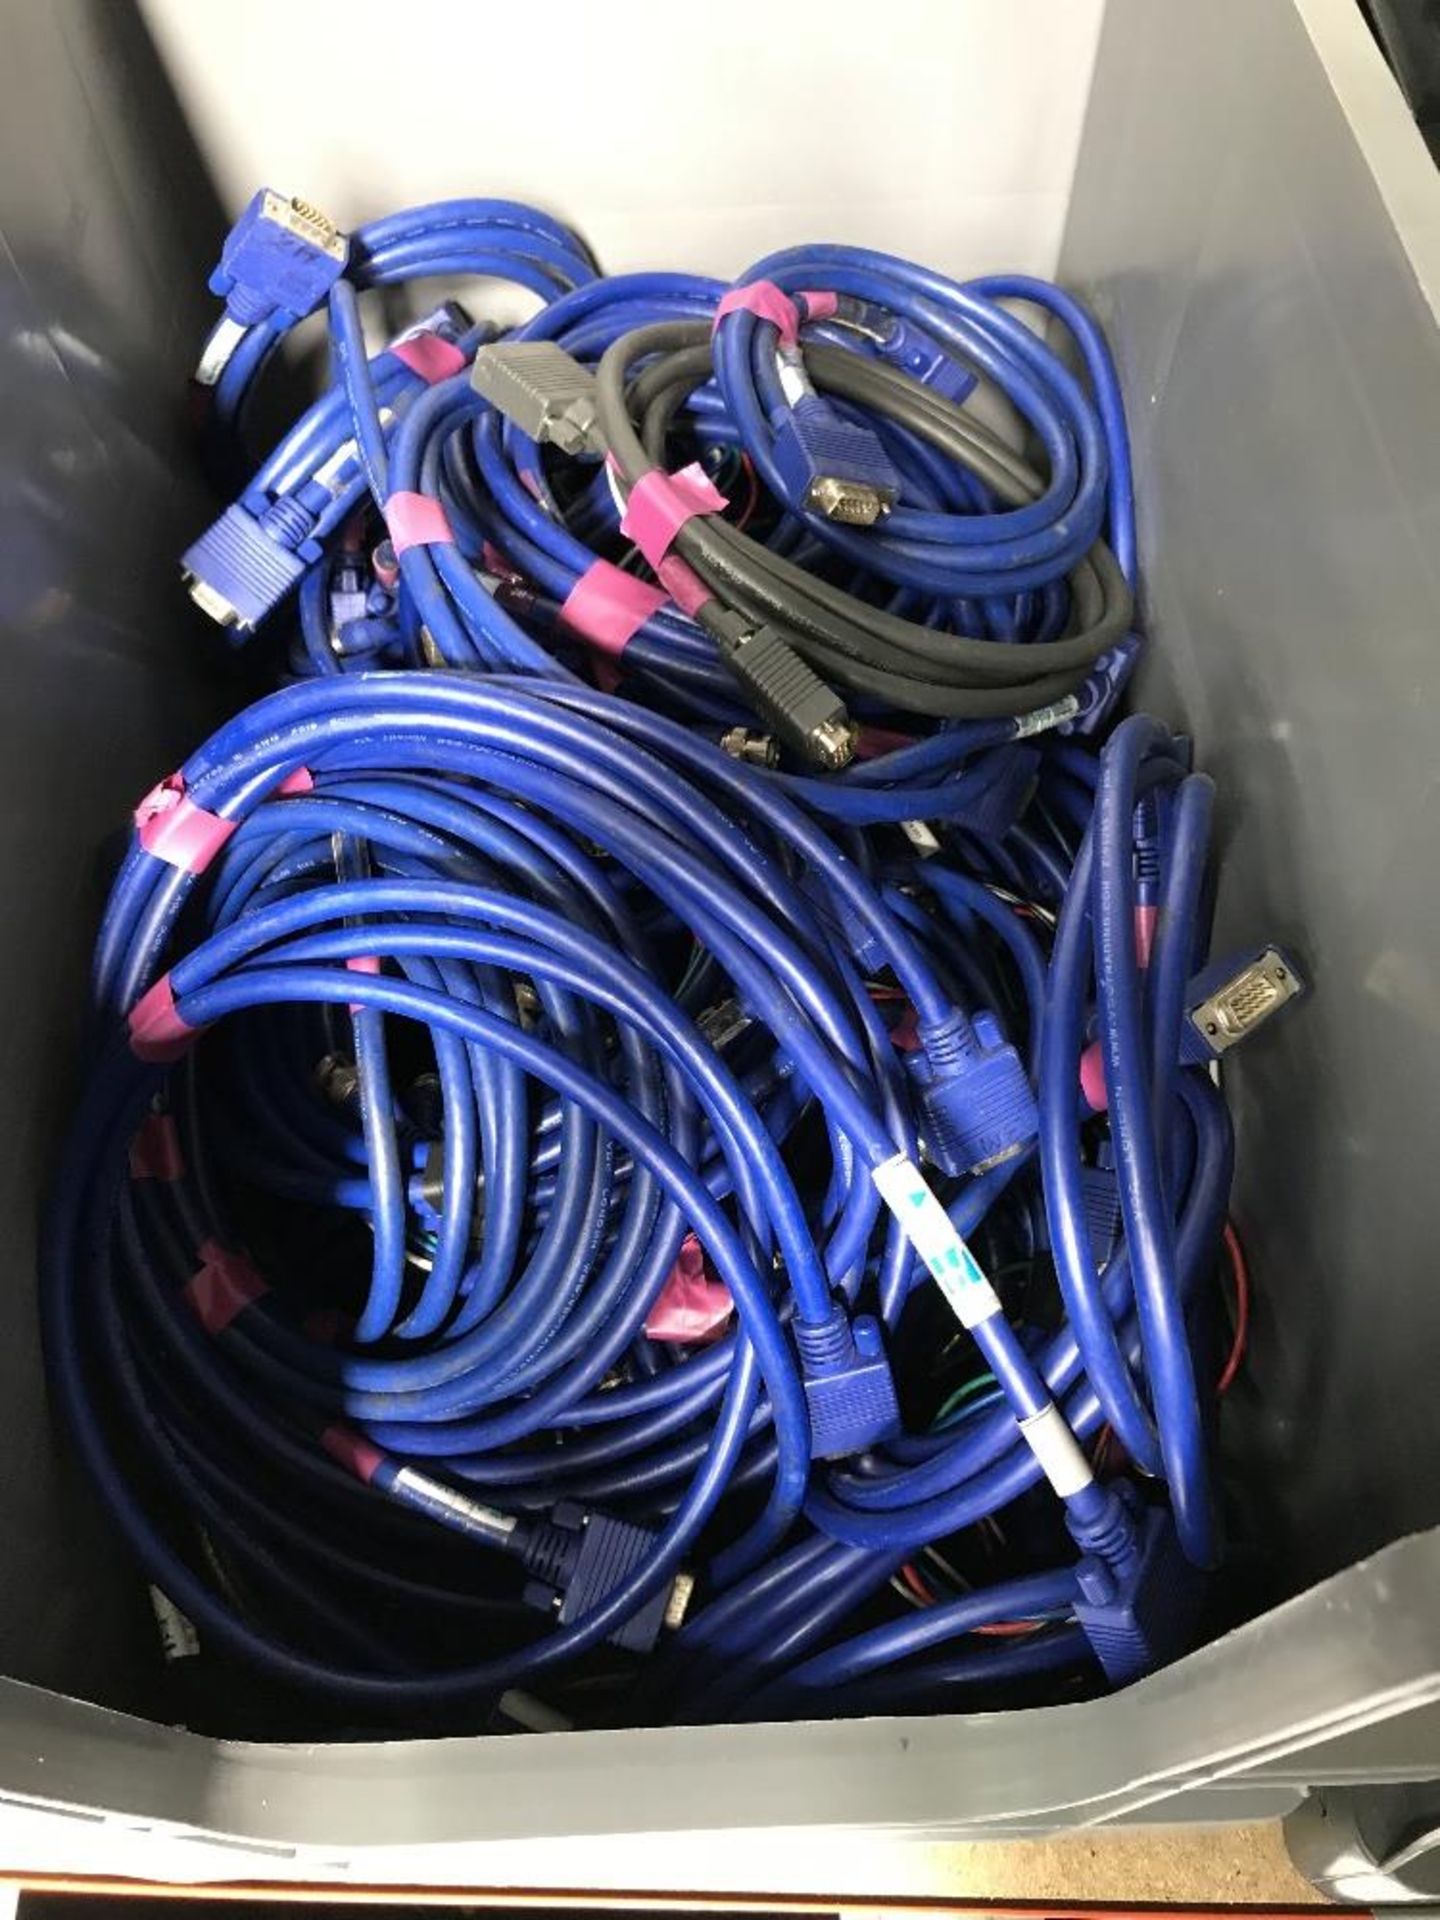 Large Quantity of 2m VGA cables With Plastic Lin Bin